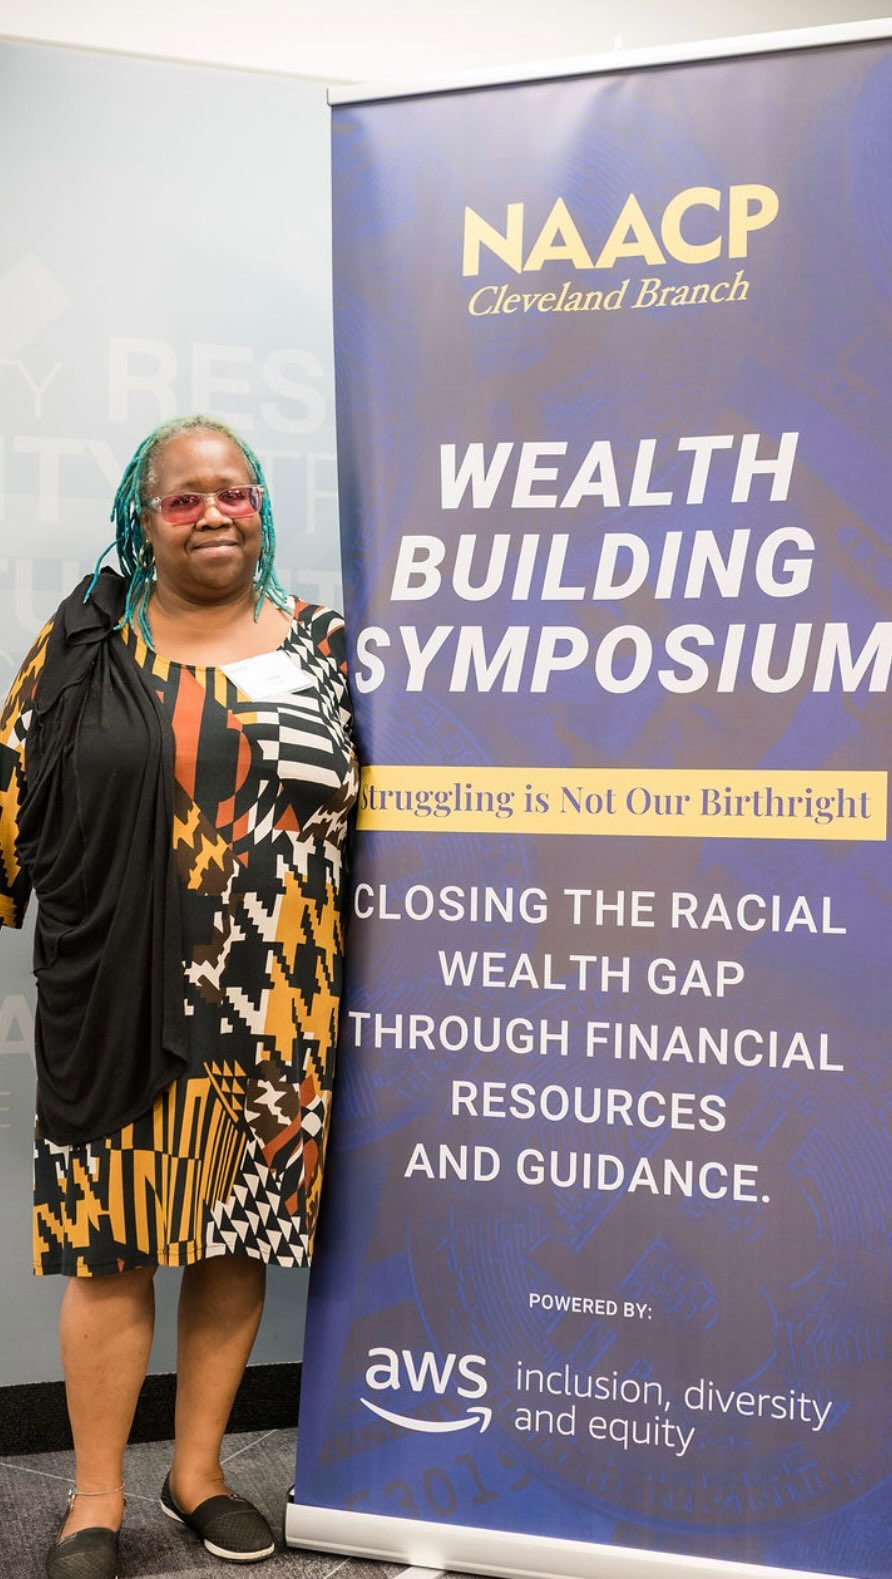 This month we focused on closing the racial wealth gap at our Wealth Building Symposium! 

There were powerful 💎 gems , & resources  shared to ensure our Black community can thrive and have financial success in a world that believes struggling is the birthright for Black African Americans! 
#StrugglingIsNotOurBirthright
We’re closing the gap! 

If you want WEALTH
Be Wealth
Talk it
Think it
Prepare yours to have it!